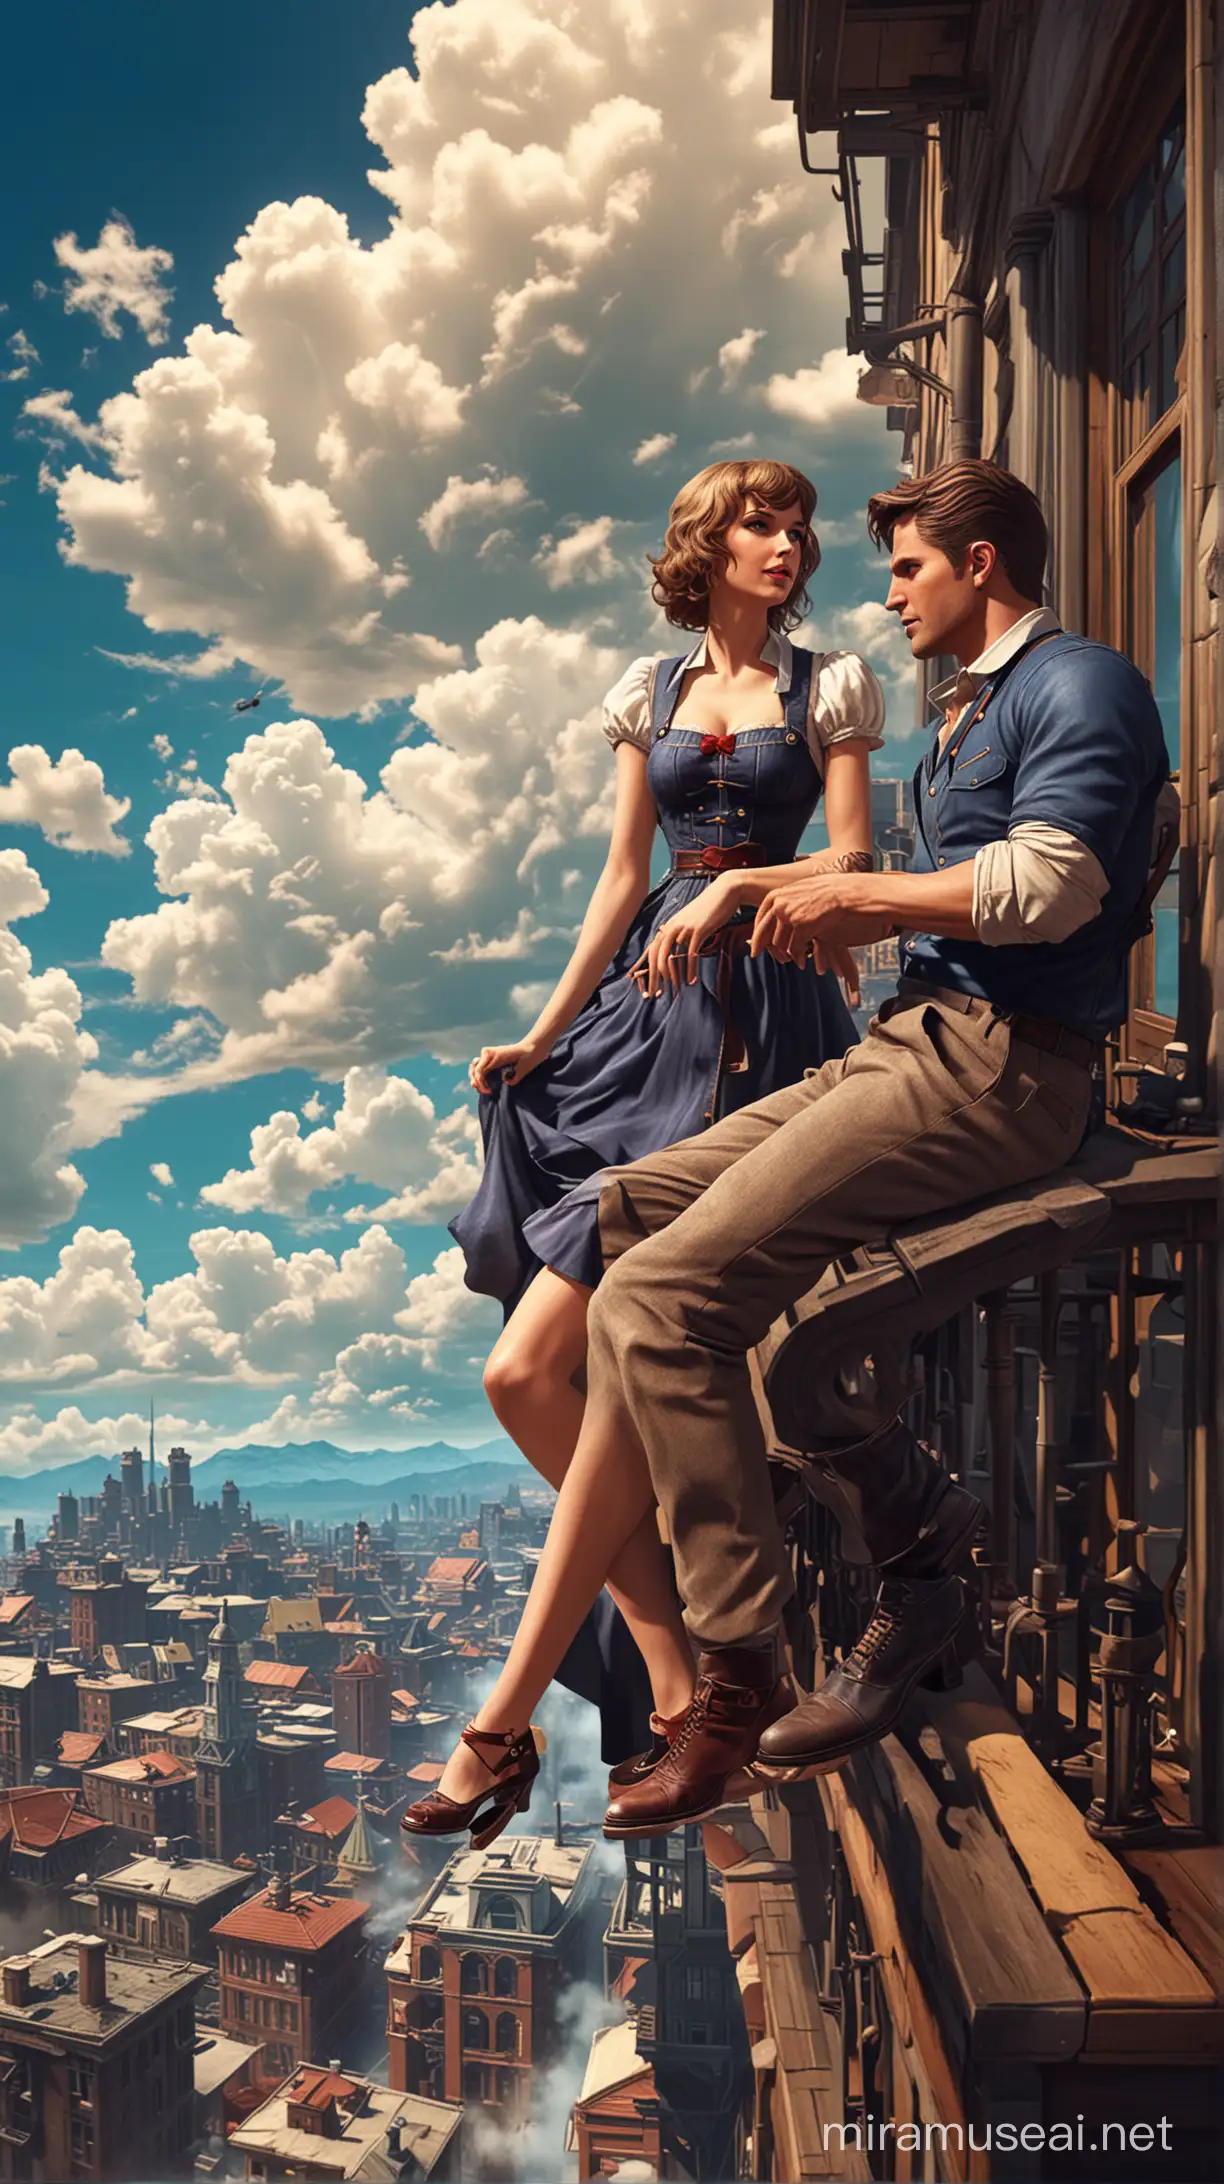 Booker dewitt from bioshock infinite and  taylor swift sitting on Balcony columbia city clouds blue sky background 